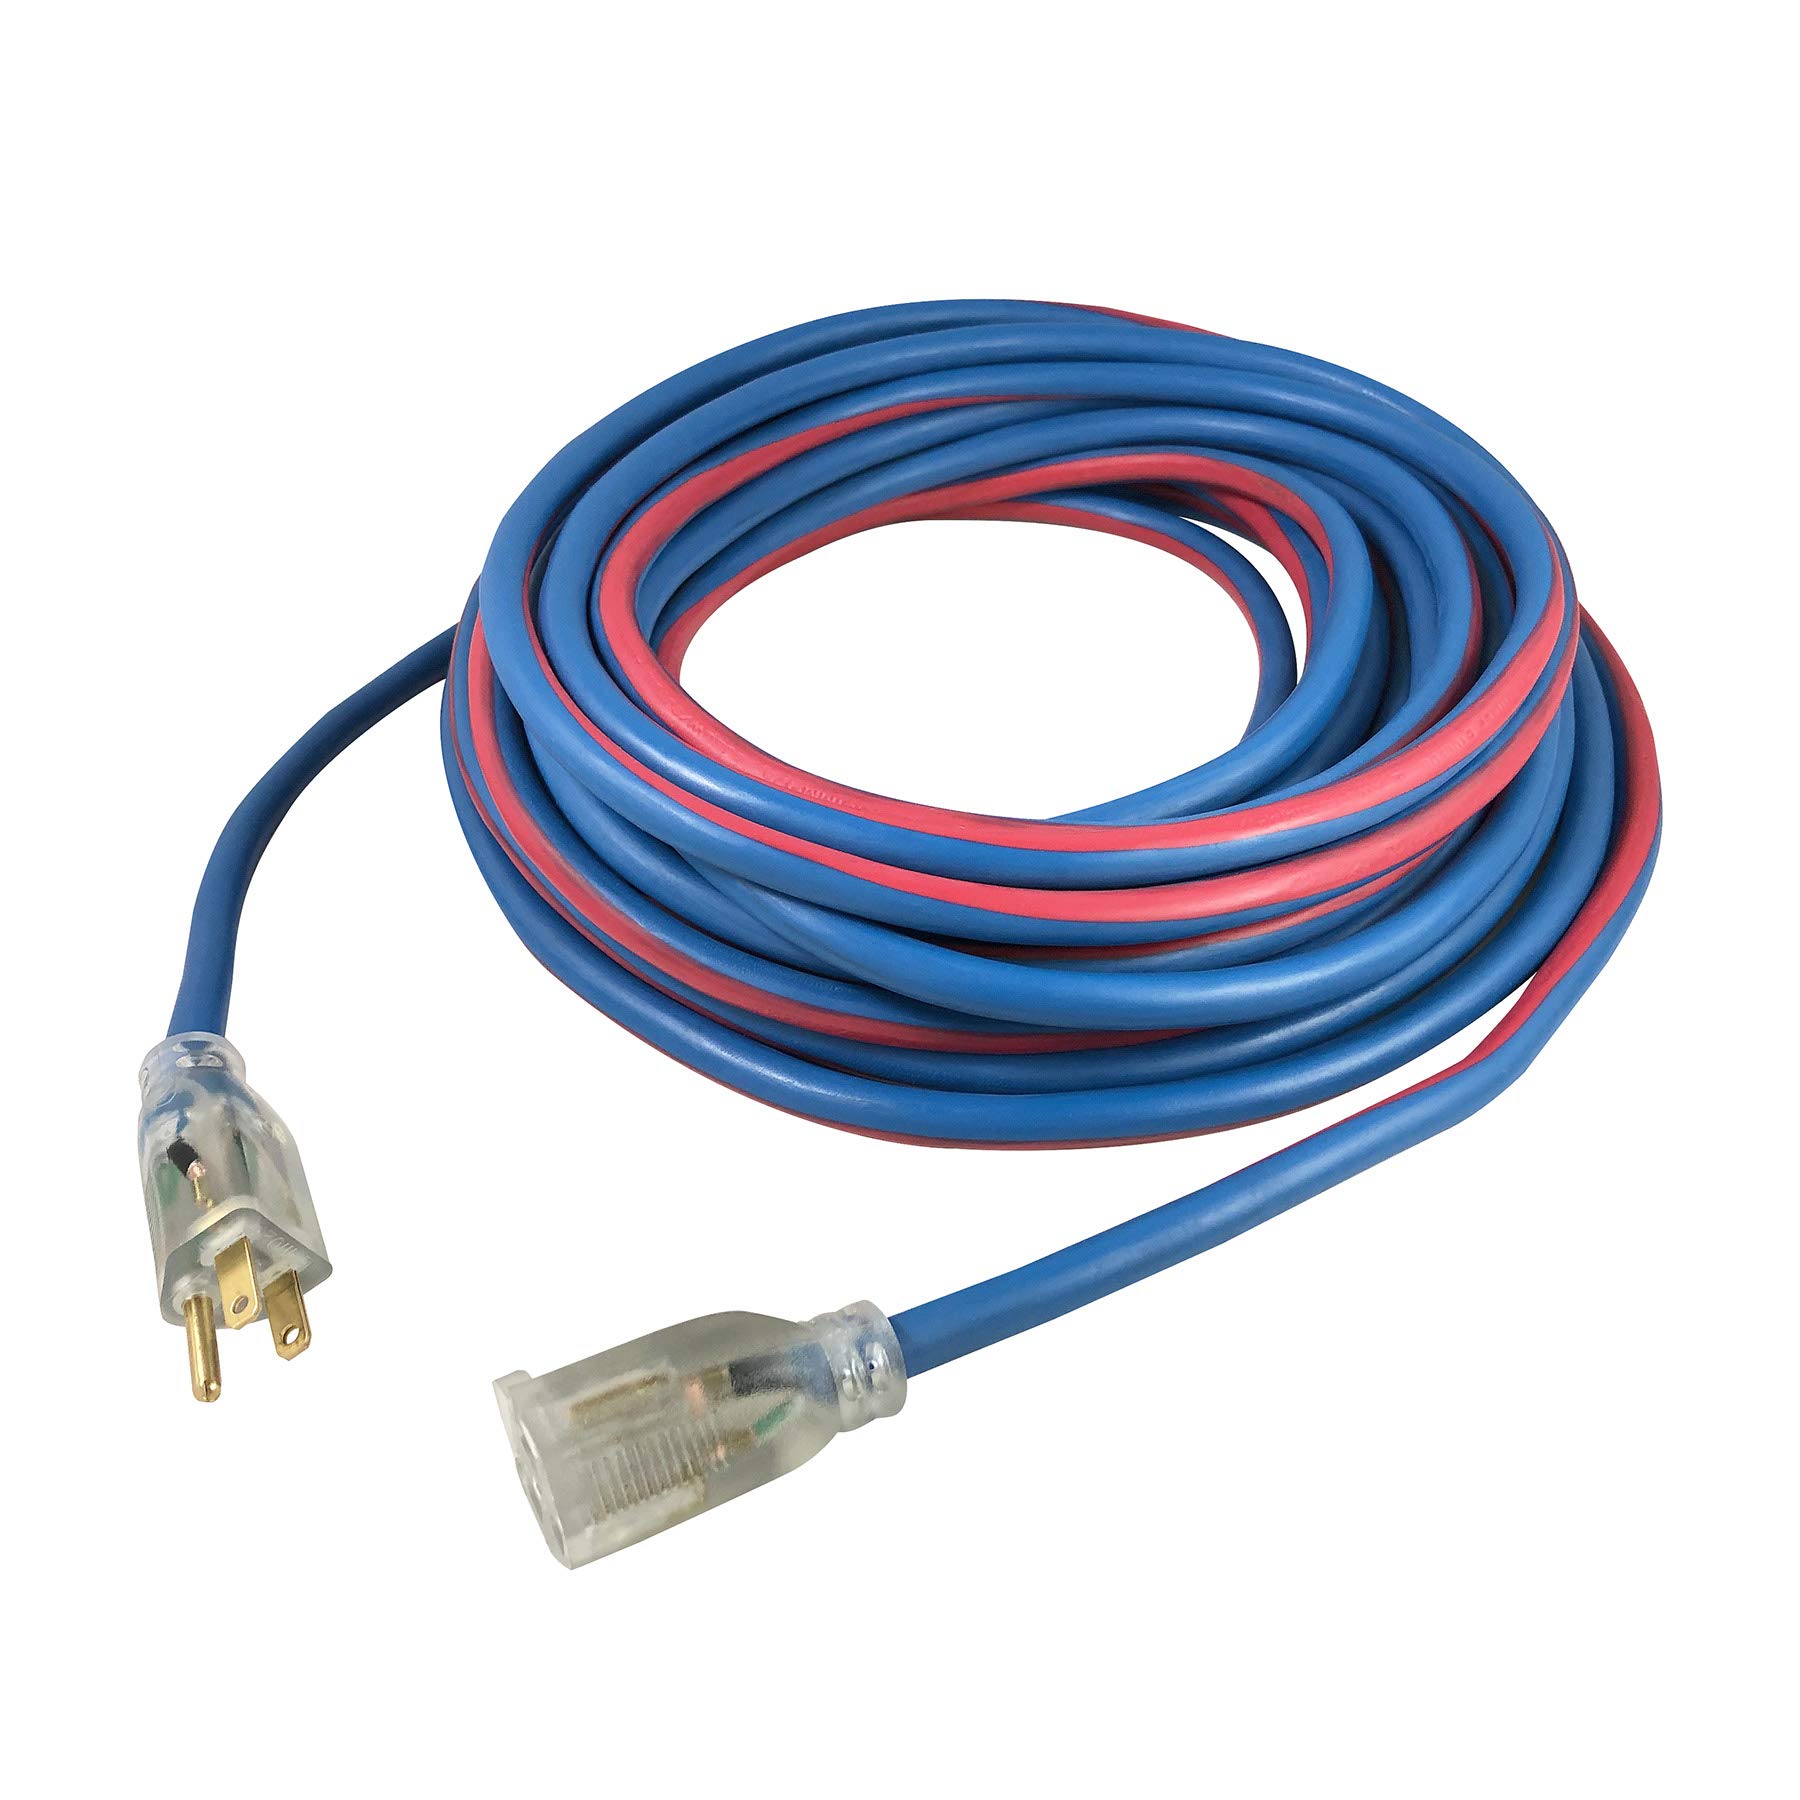 100' US Wire & Cable All-Weather 12/3 SJEOOW, 15 Amp, 125V, 1875 Watts Extension Cord w/ Lighted End (Blue/Red) $86.40 + Free Shipping